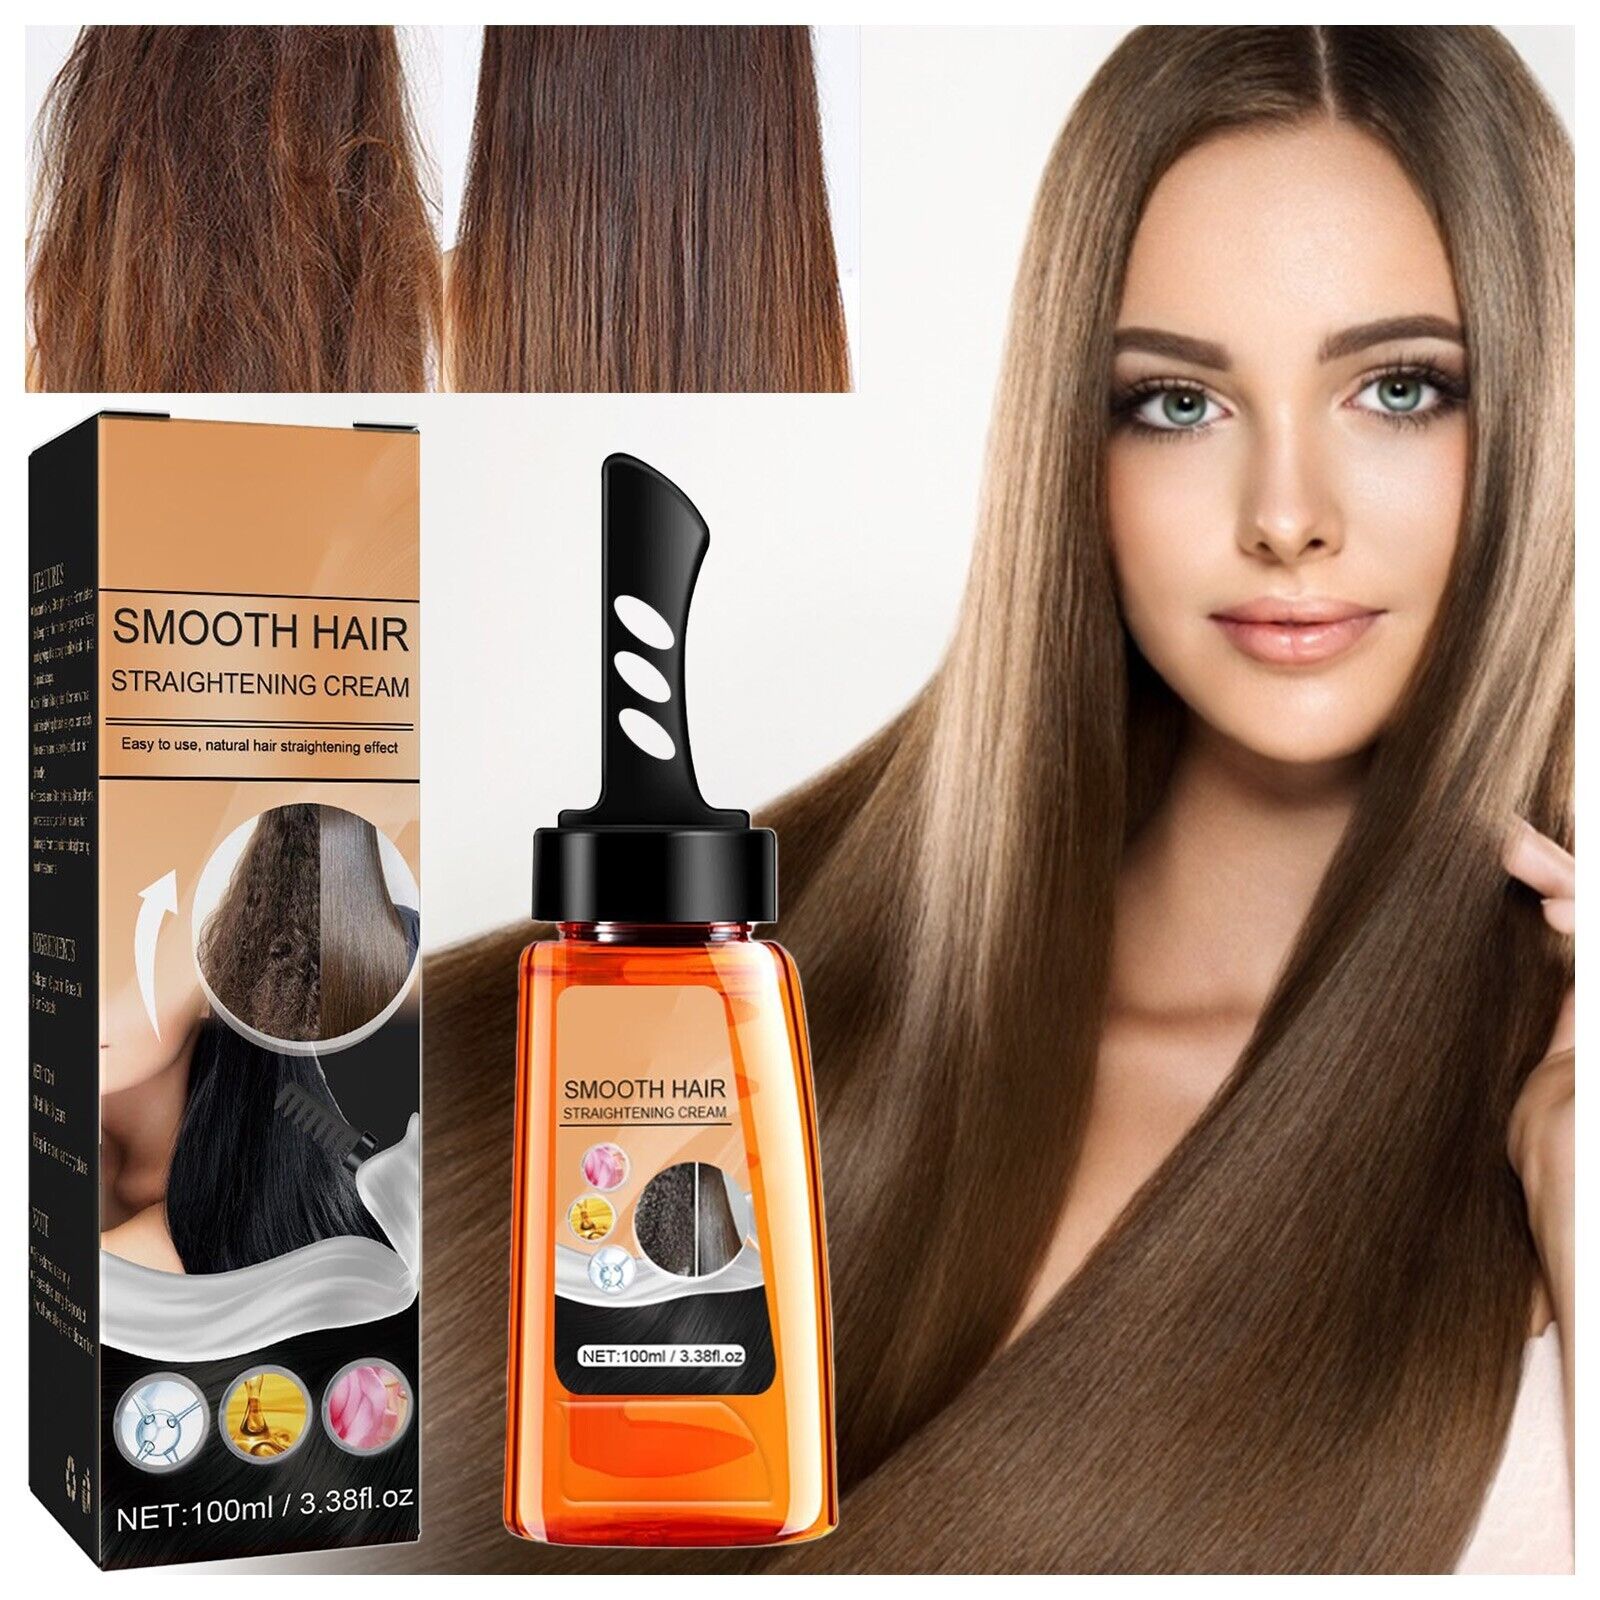 Protein Correction Straightening Hair Care Natural Conditioner Frizzy Hair  | eBay